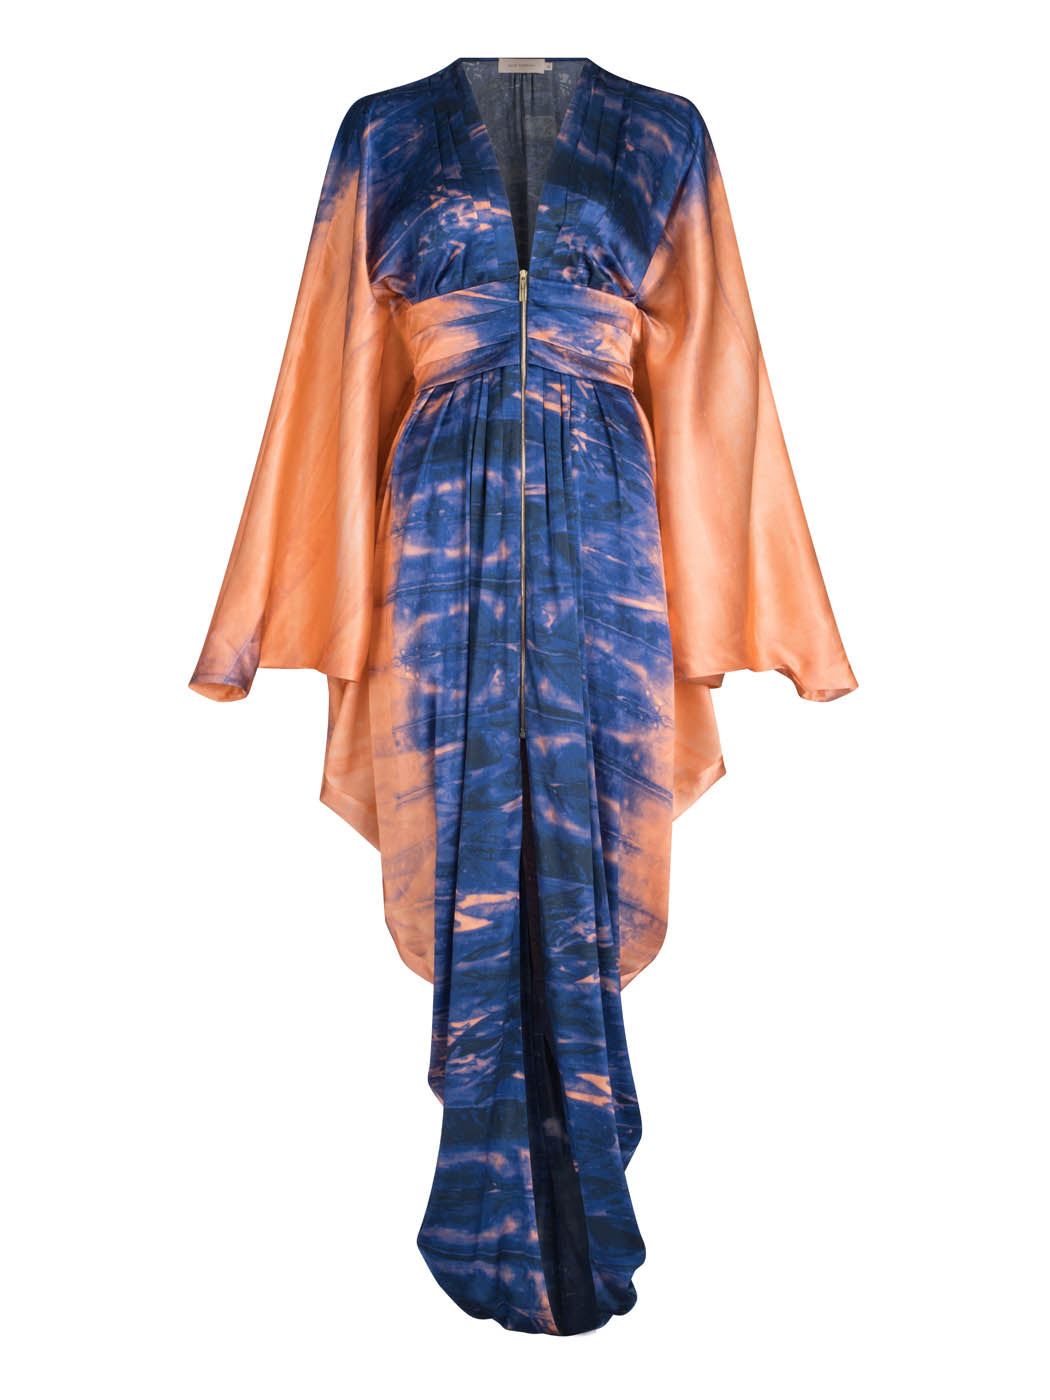 A long, flowing Danette Dress Mediterranean Coral Blue with blue and orange tie-dye patterns, displayed against a white background.